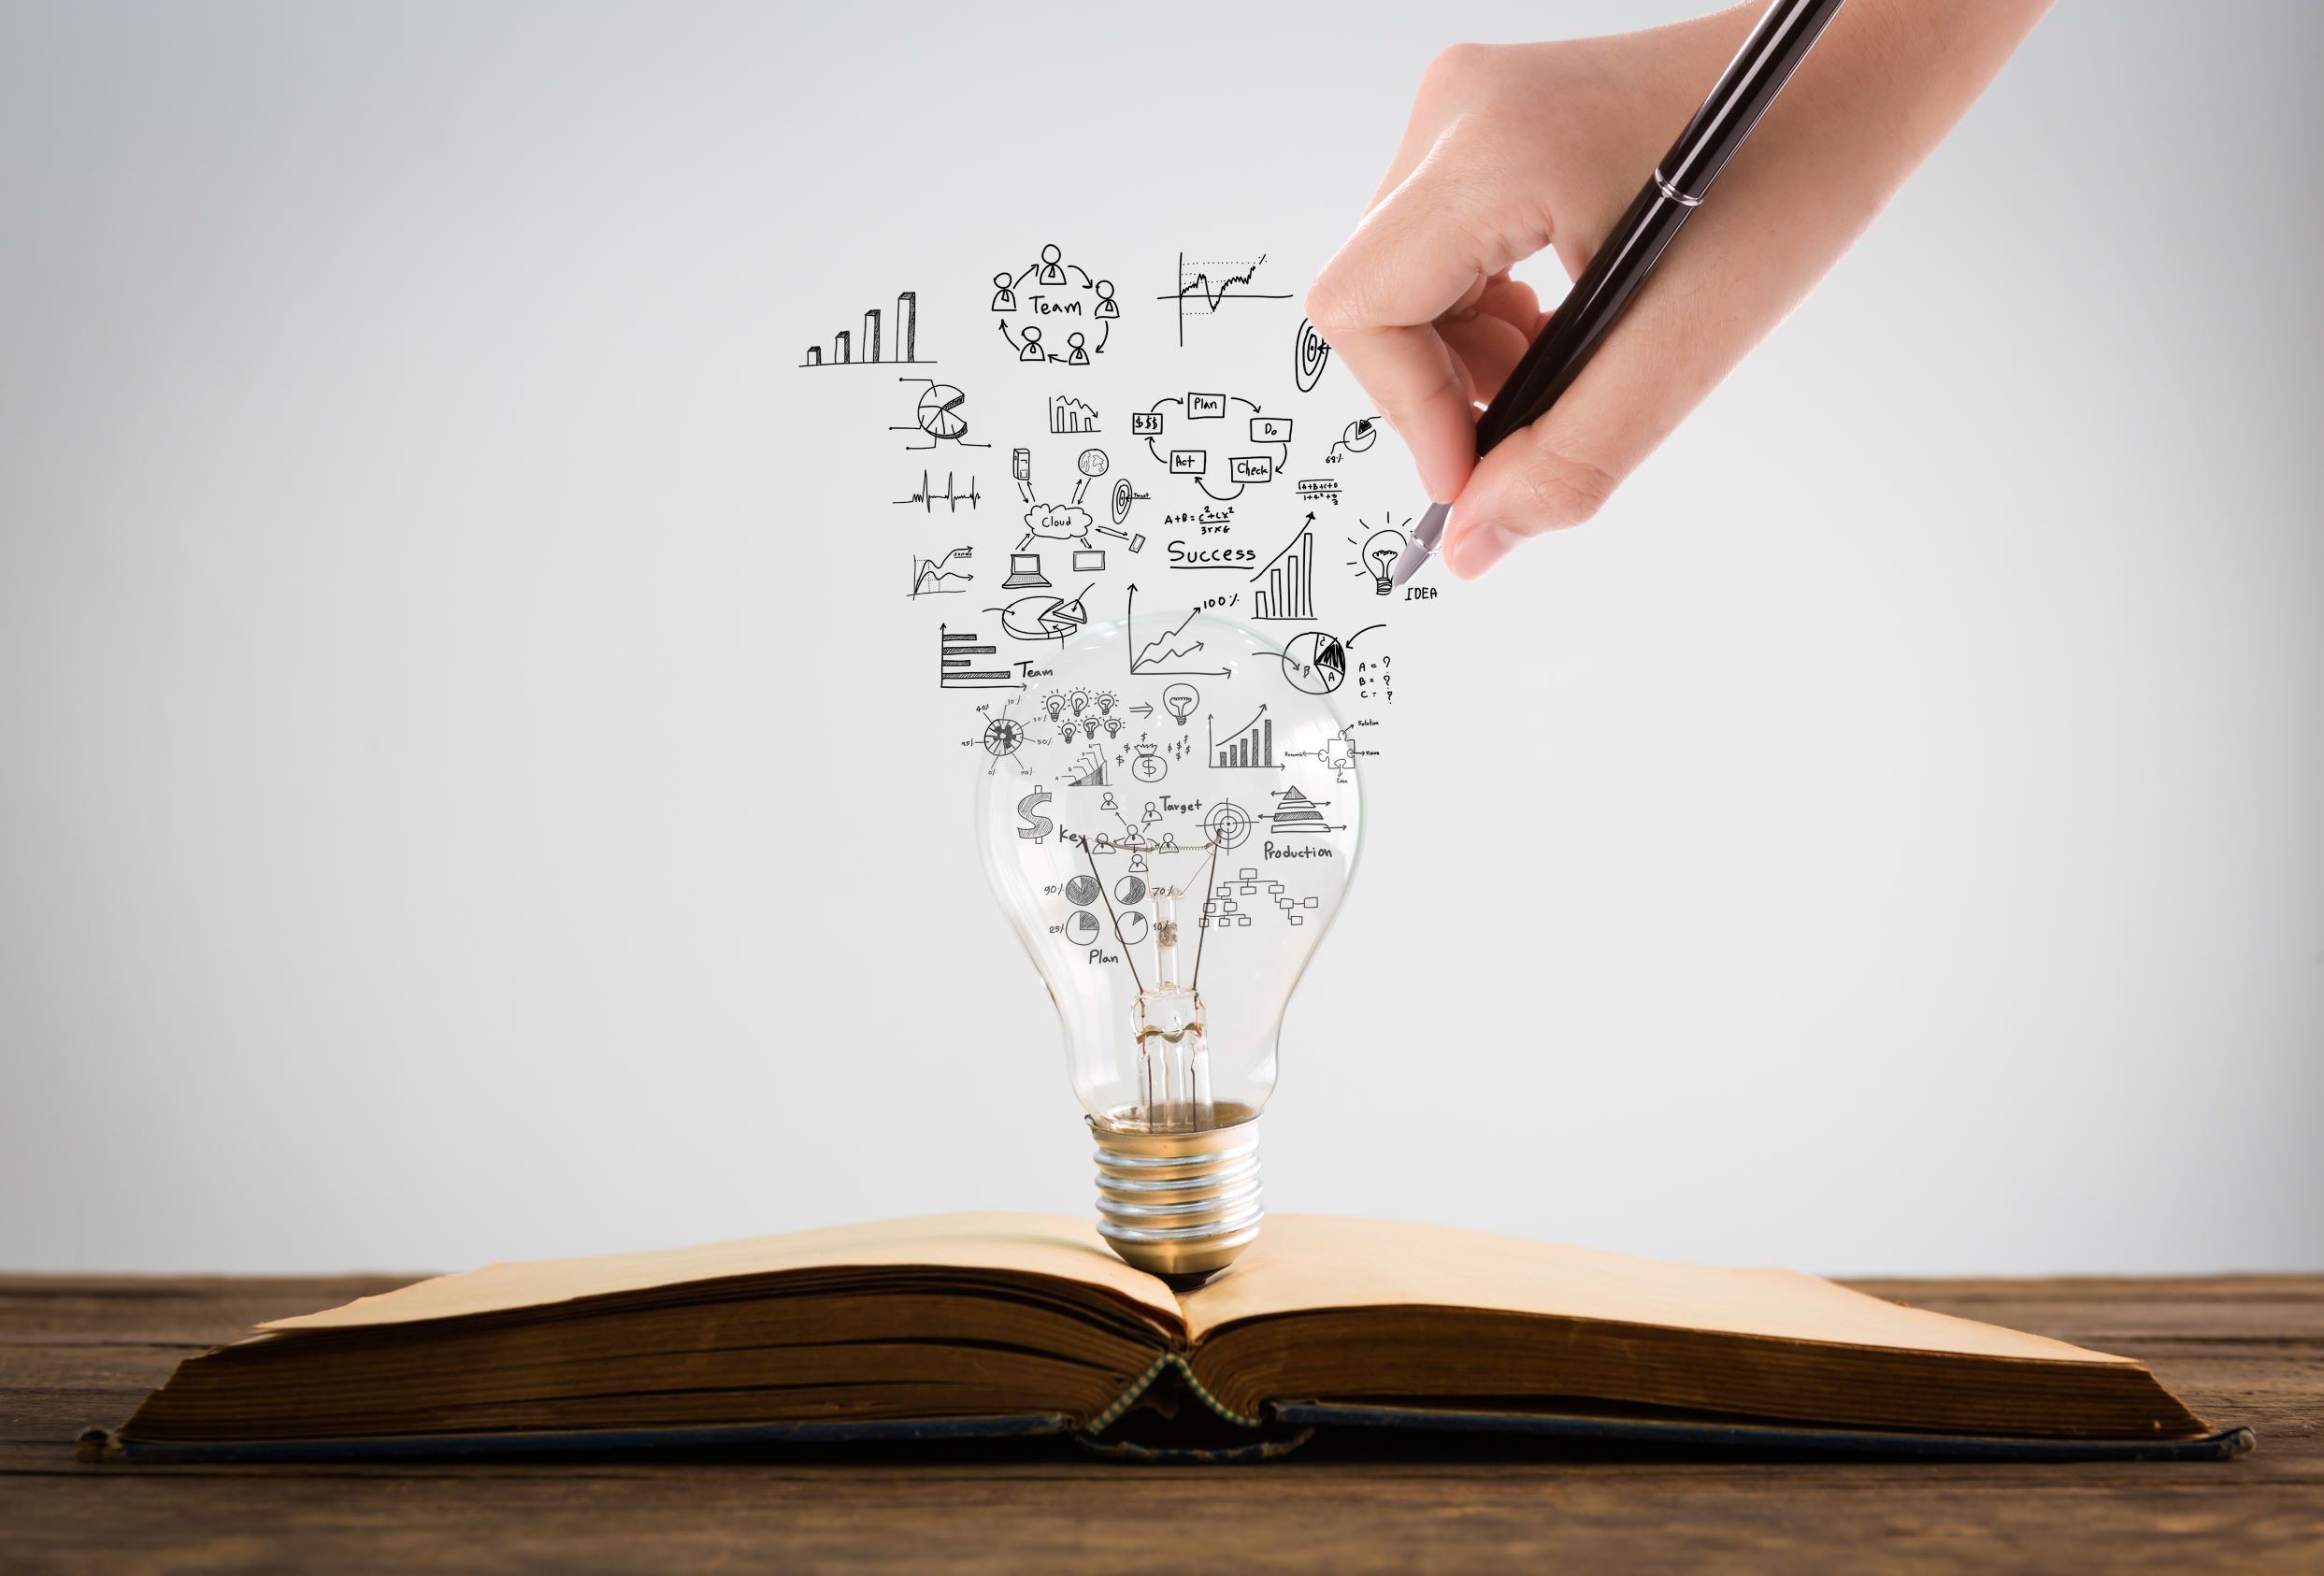 Journal laying open on a table with a lightbulb standing up in the middle. A hand is drawing SEO symbols with a pencil behind the bulb.